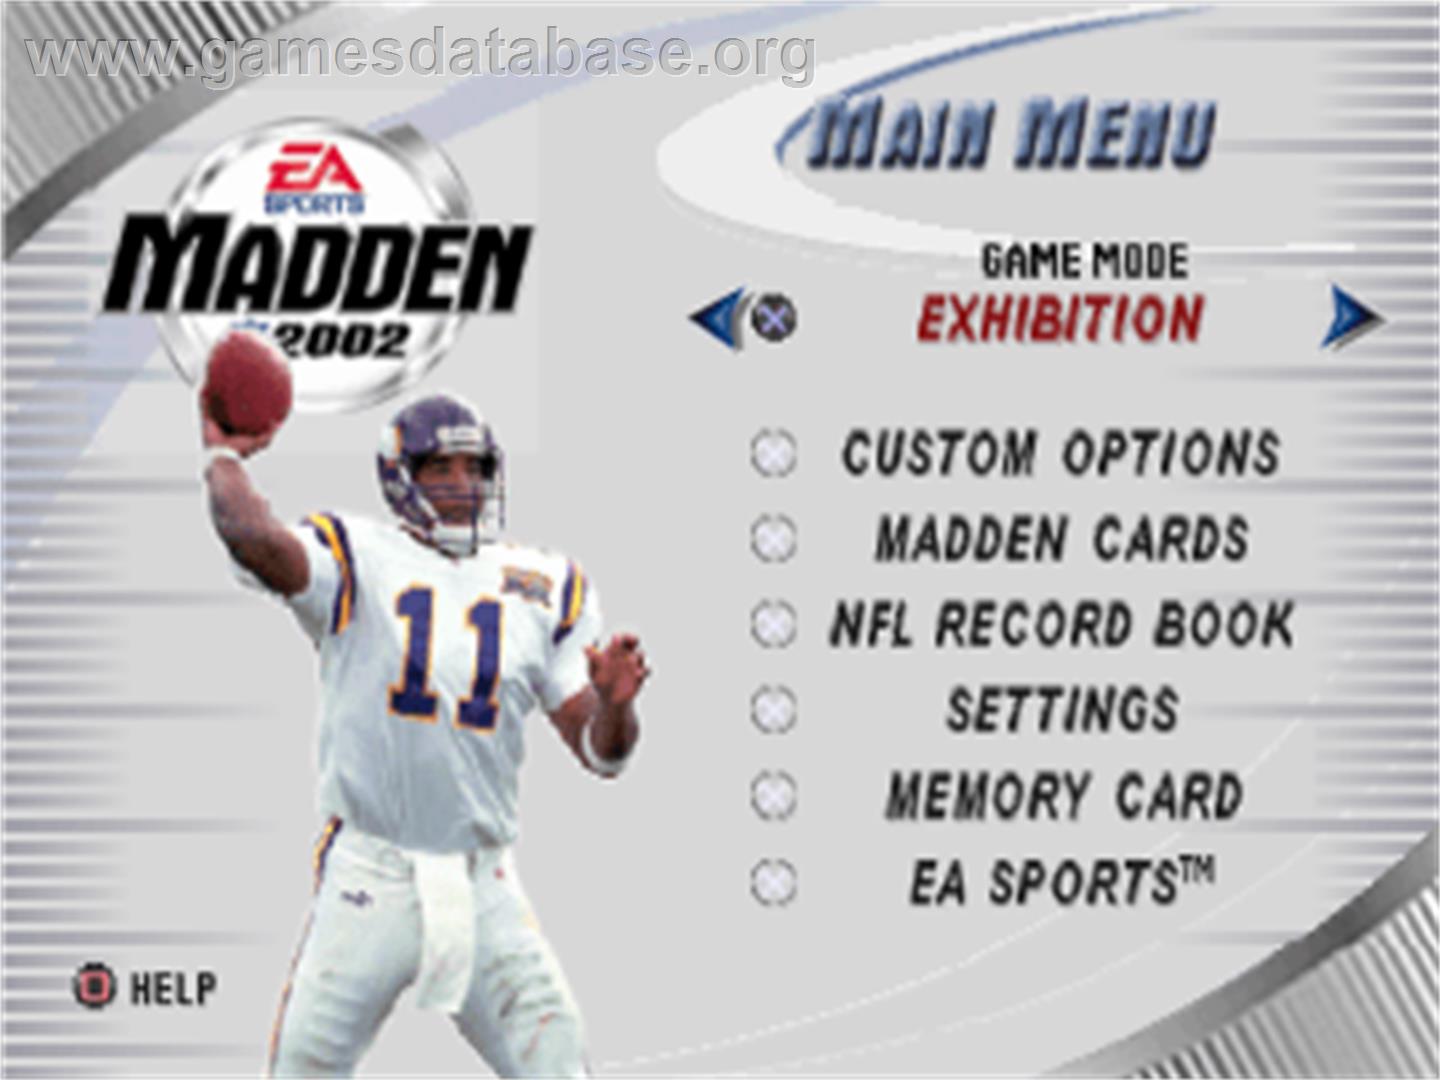 Madden NFL 2002 - Sony Playstation - Artwork - Title Screen